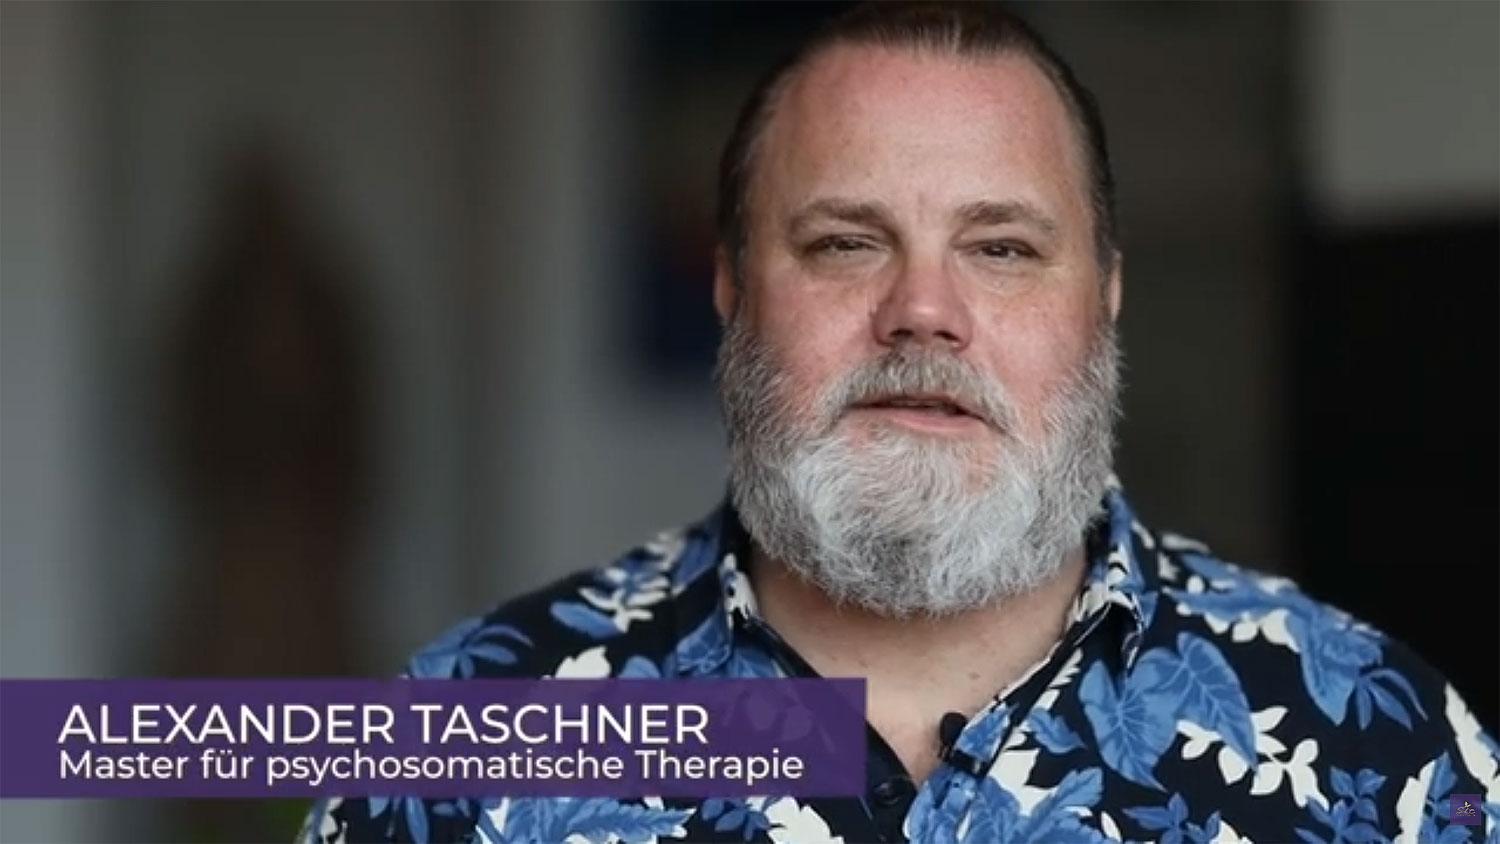 Video - TRANSFORMATION OF HOLISTIC THERAPY WITH SHT-CHI